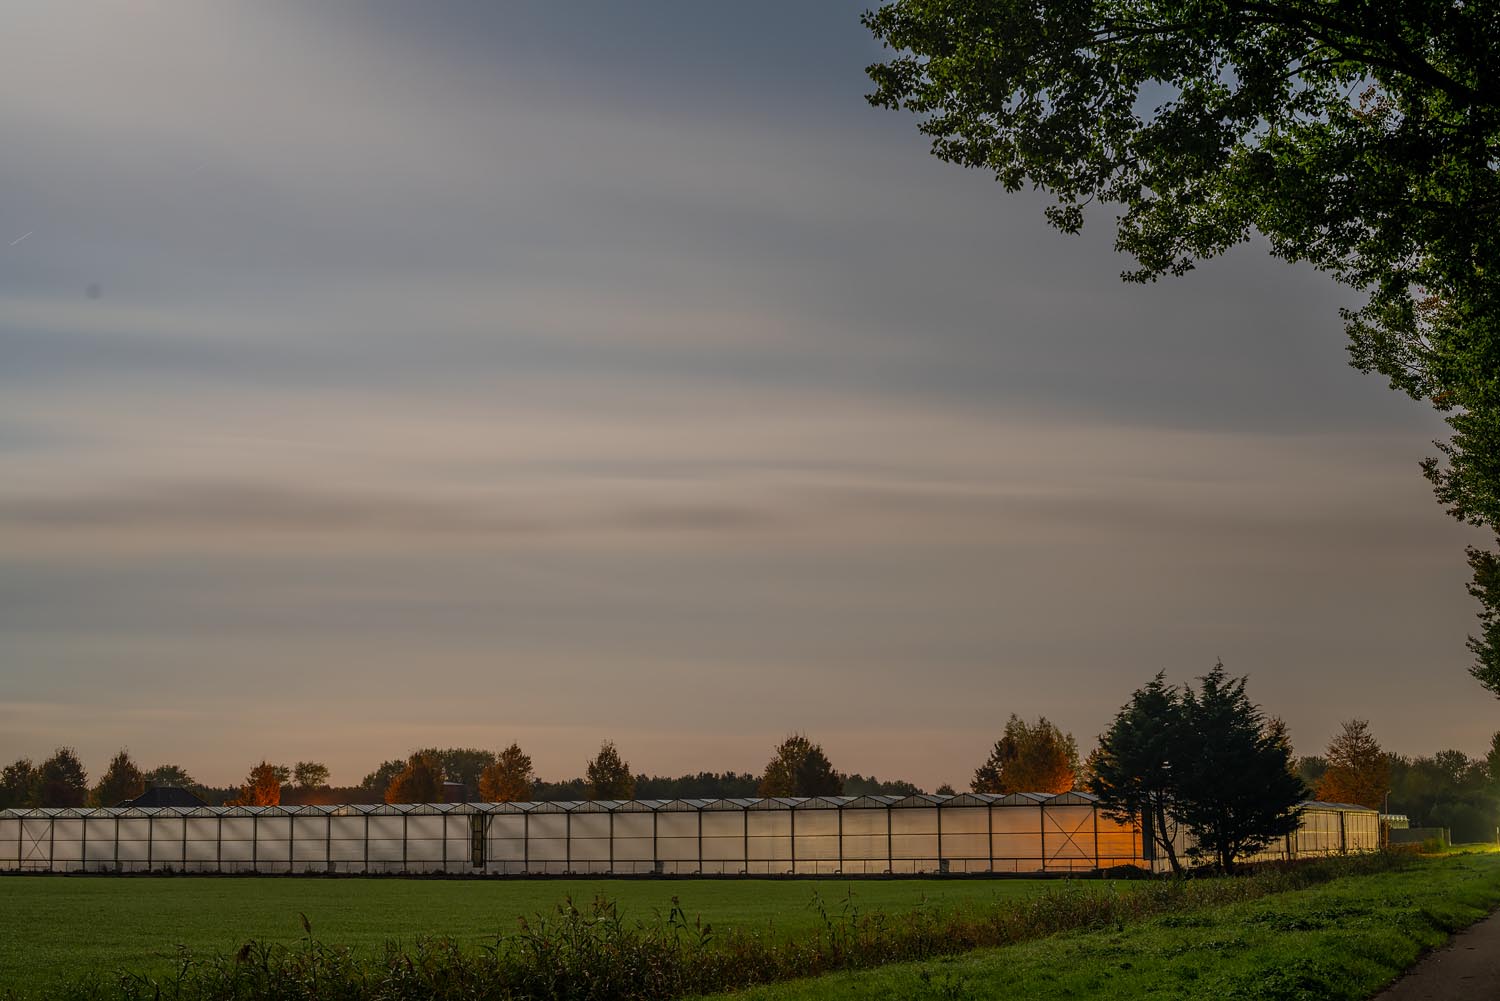 Sites at Risk of Climate Change: Night Landscape Photographs in The Netherlands, Steve Giovinco, Greenhouse Tulips, with Strange Glowing Light Flevoland with Tree